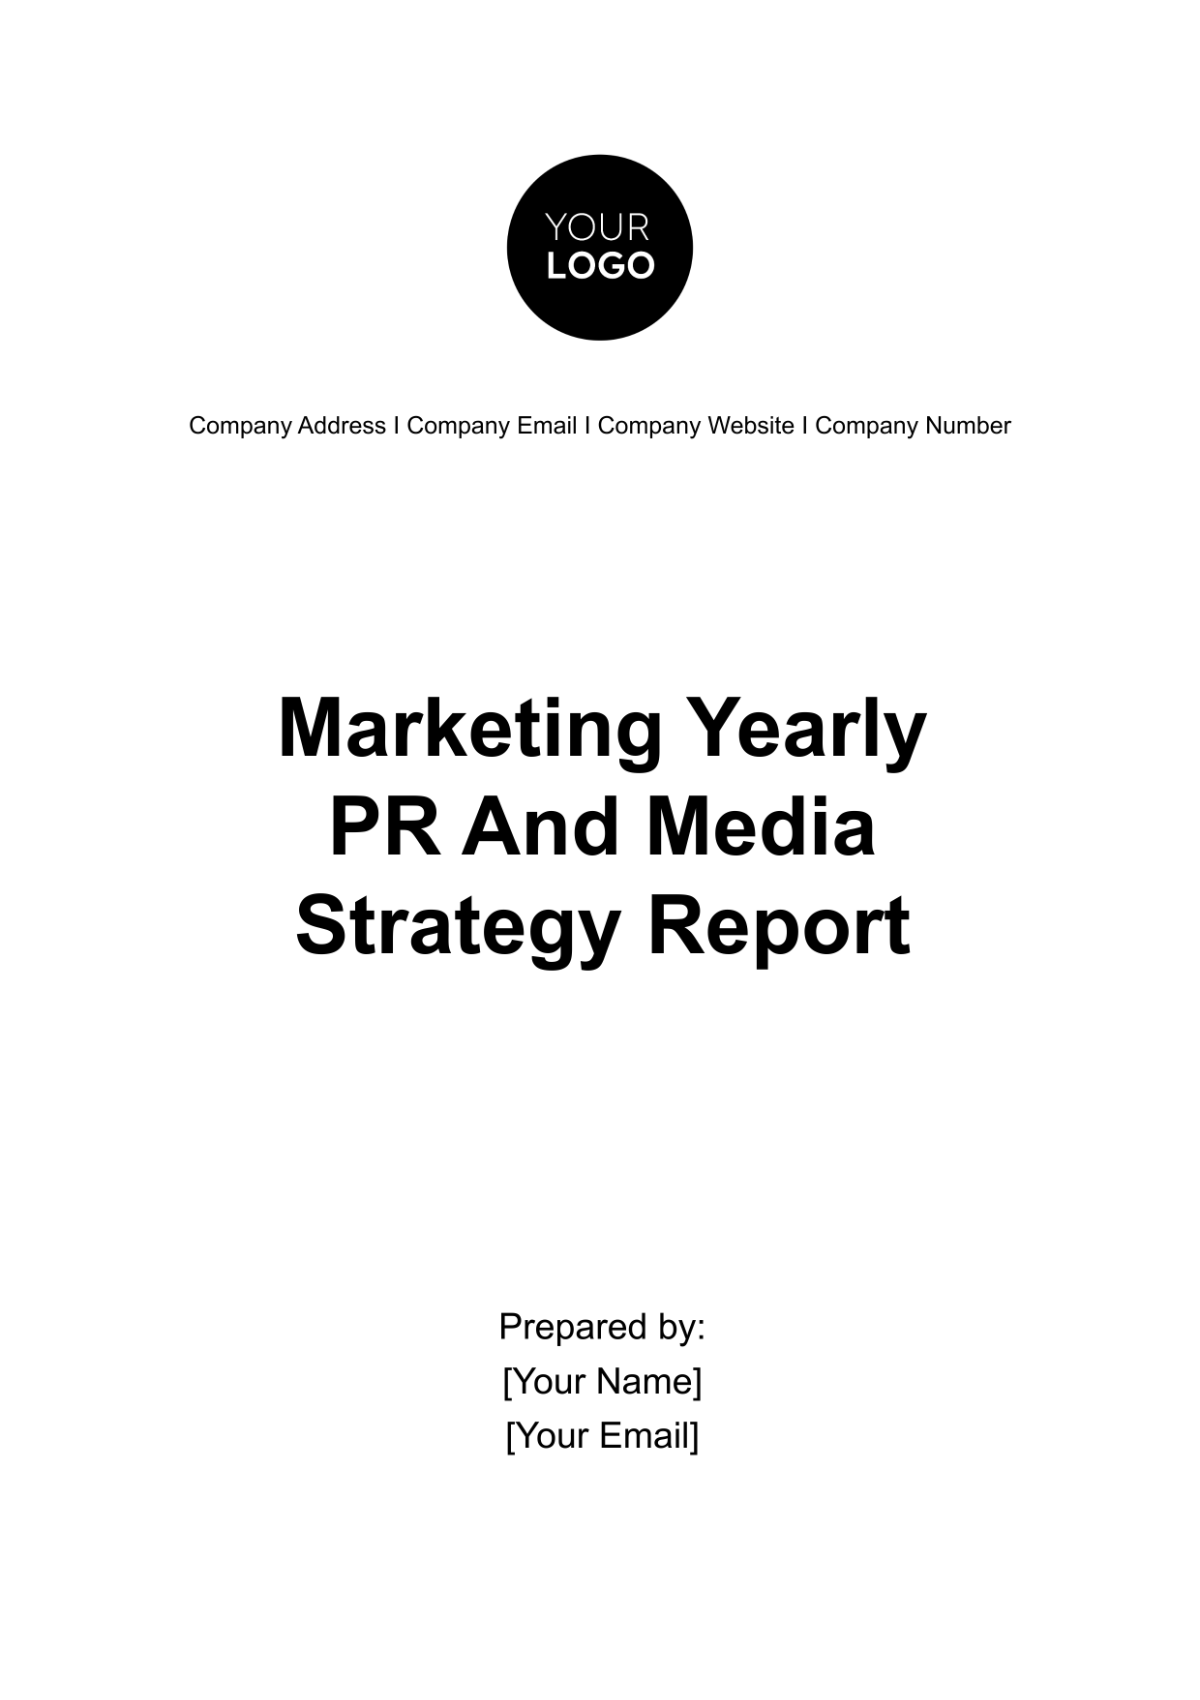 Free Marketing Yearly PR and Media Strategy Report Template